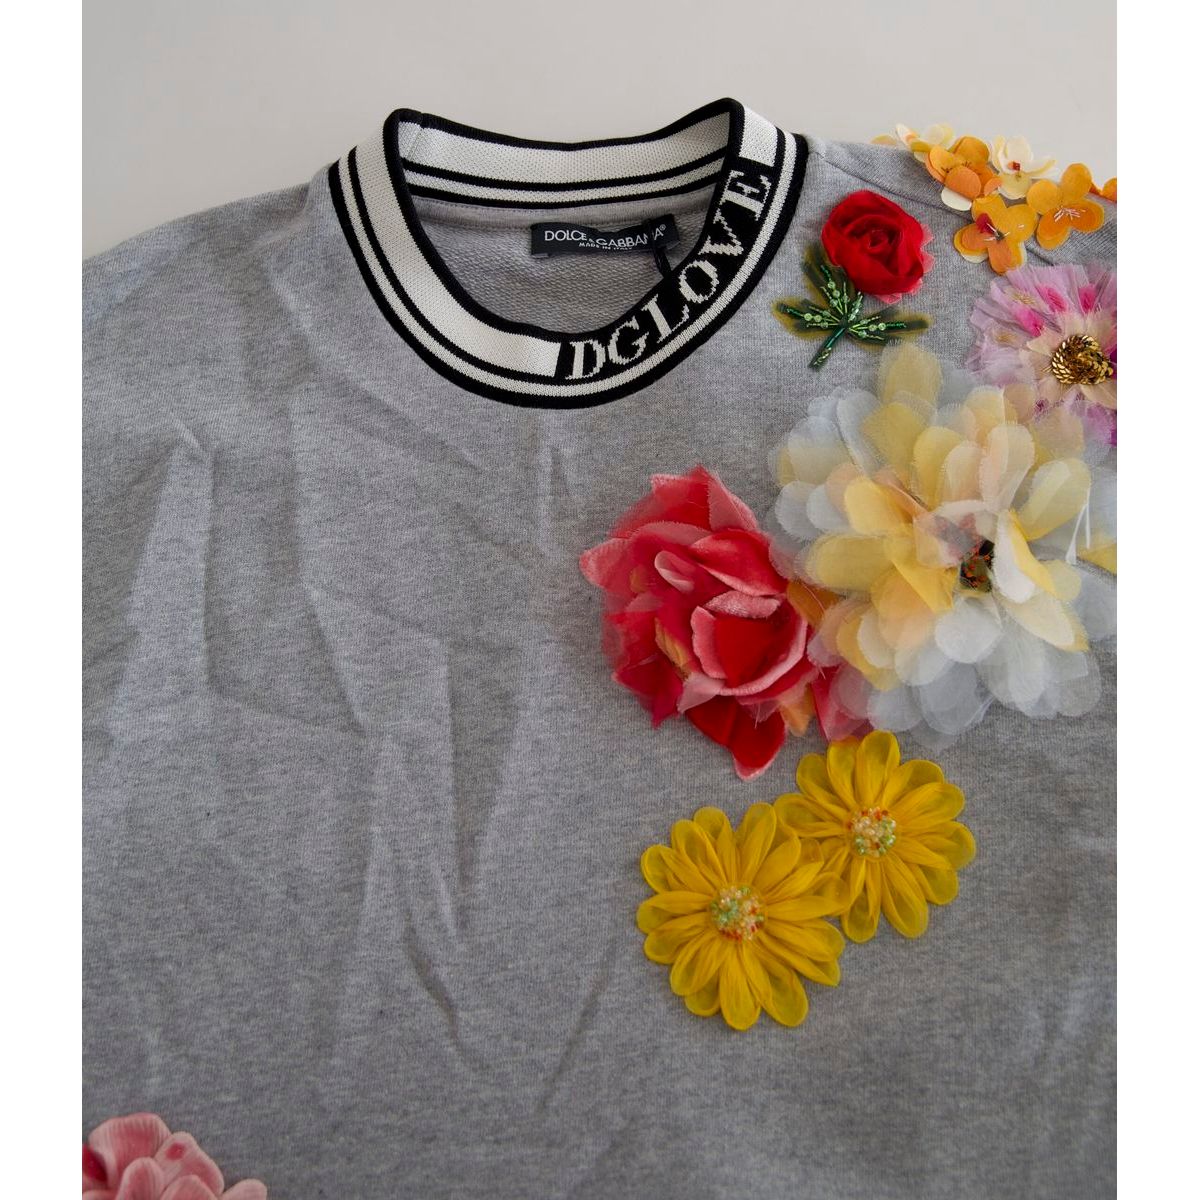 Dolce & Gabbana Chic Embellished Crew Neck Pullover Sweater gray-dg-amore-queen-floral-pullover-sweater 465A0750-copy-scaled-0efb253f-24f_05c83e31-066c-494a-8700-168622354477.jpg